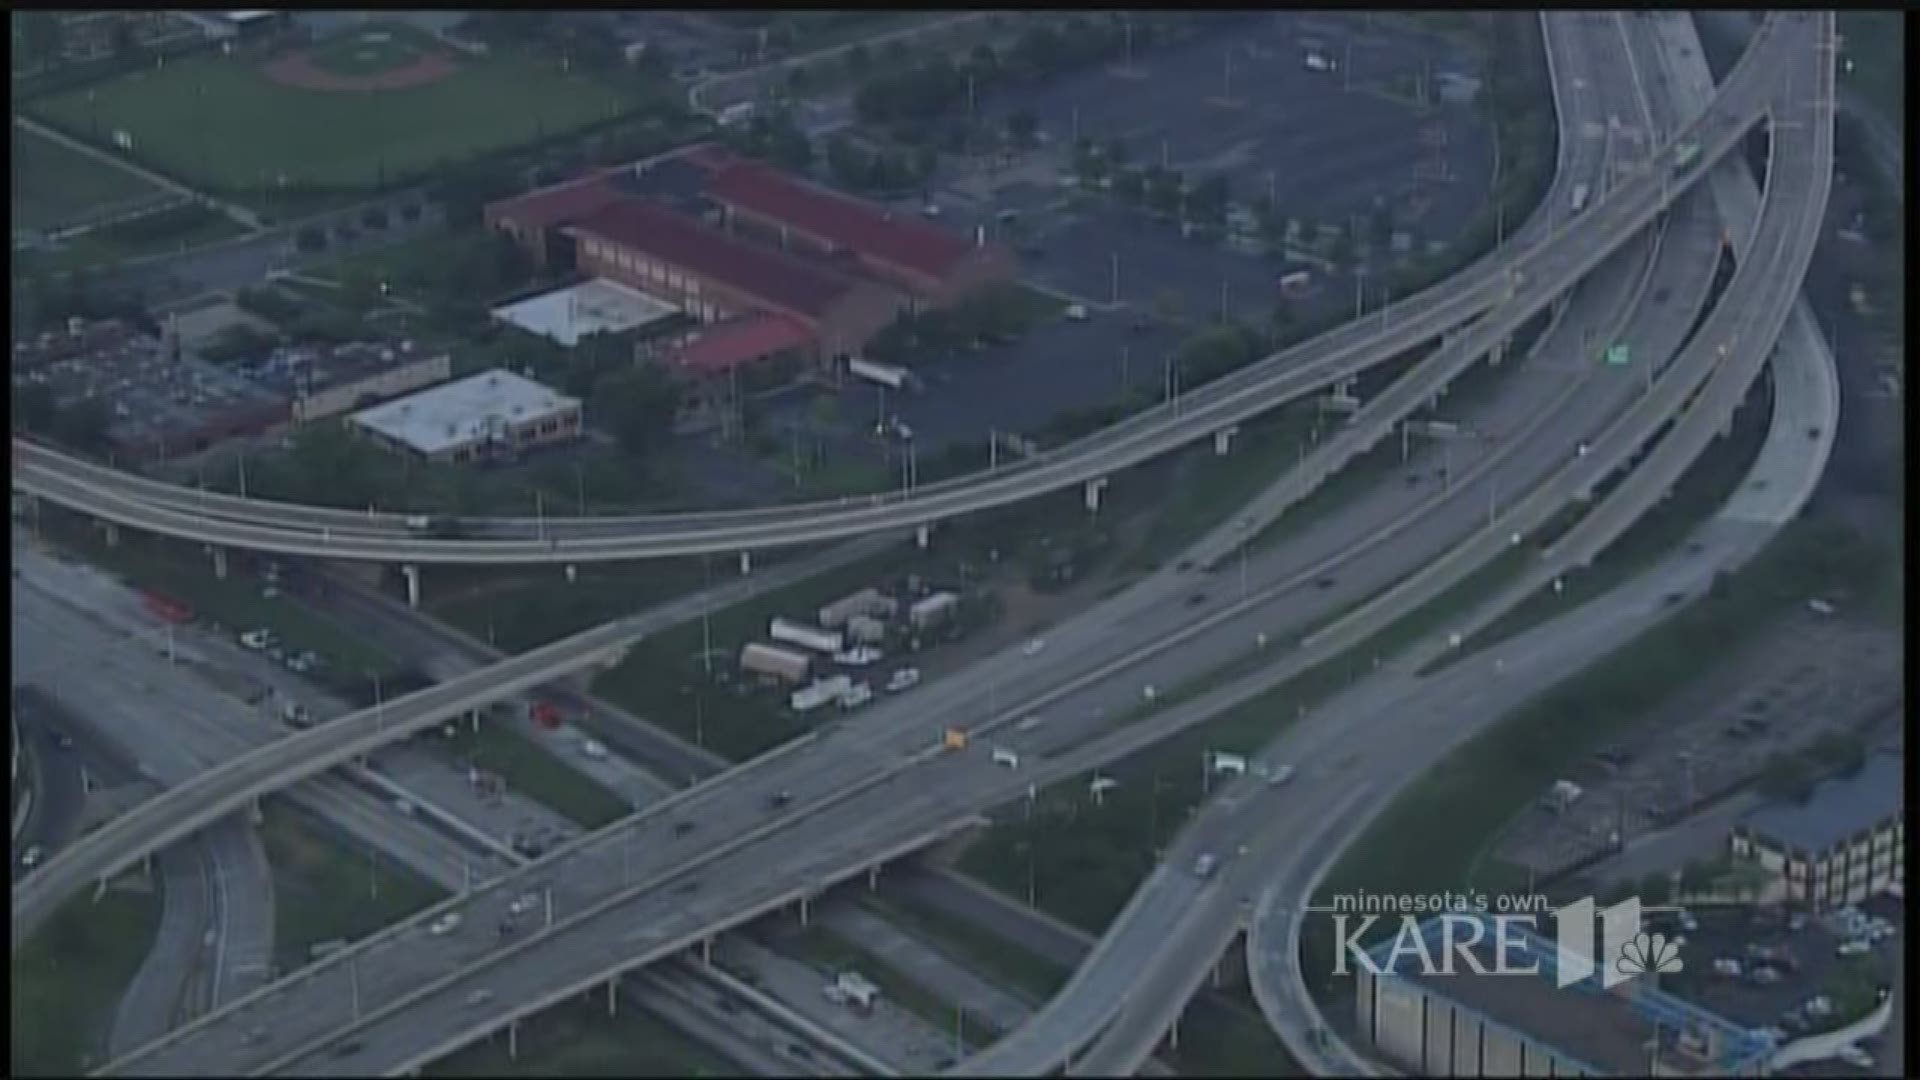 Rush hour promises to be a major headache the next two weeks after crews close the ramp from eastbound I-394 to eastbound I-94 for construction.